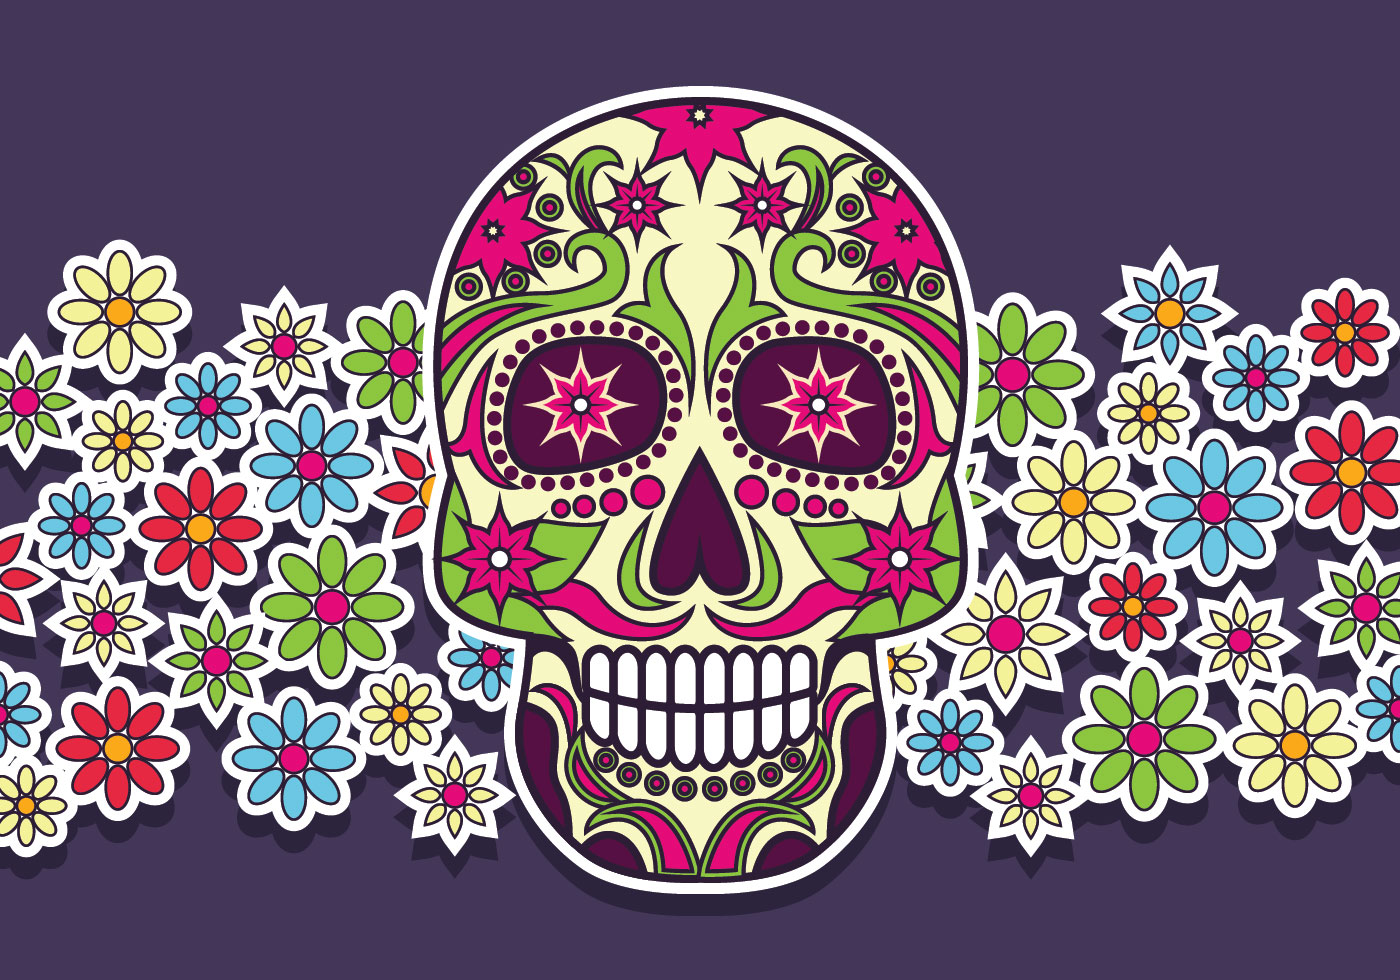 Download Day Of The Dead Background - Download Free Vectors ...